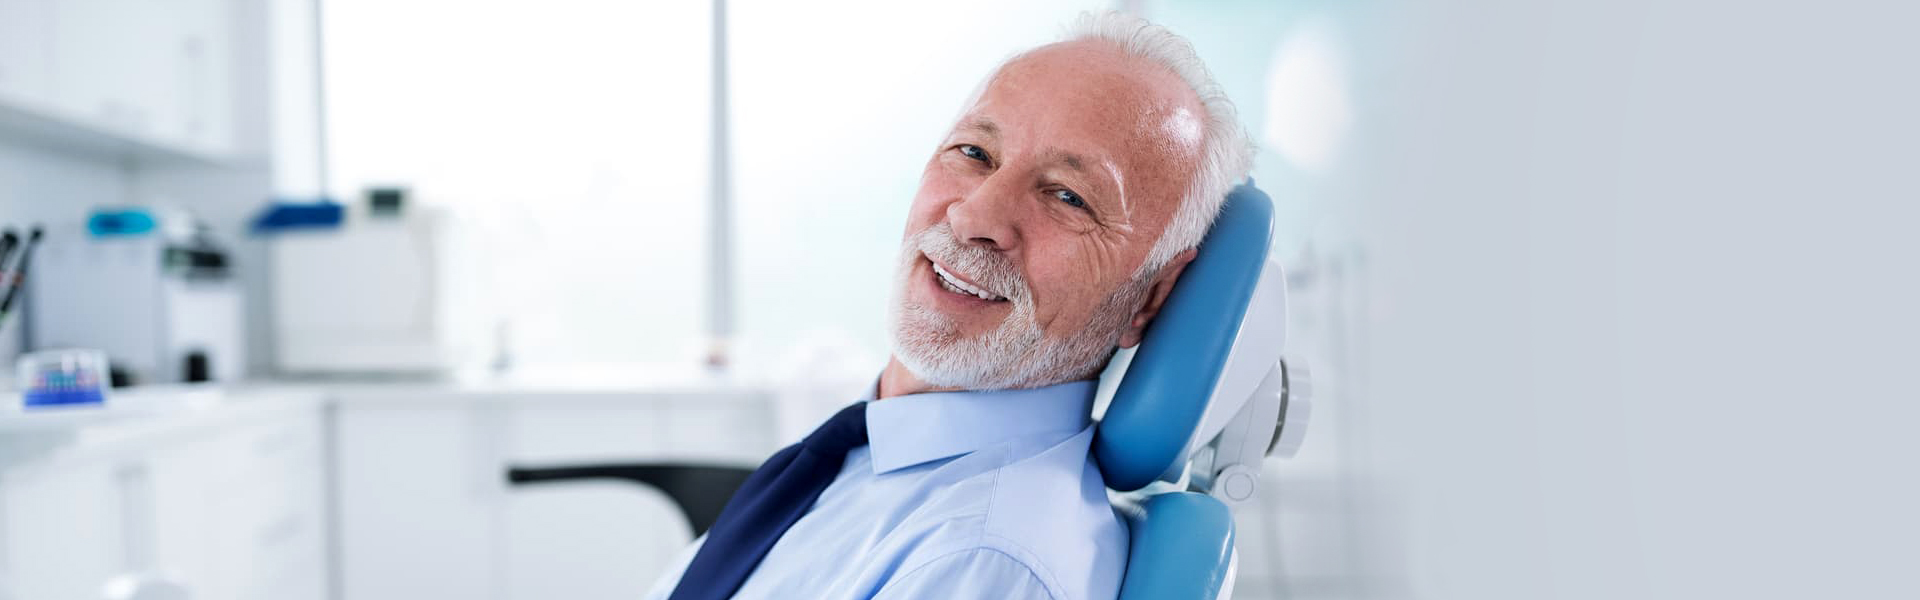 Different Types of Dental Implants & Their Functions